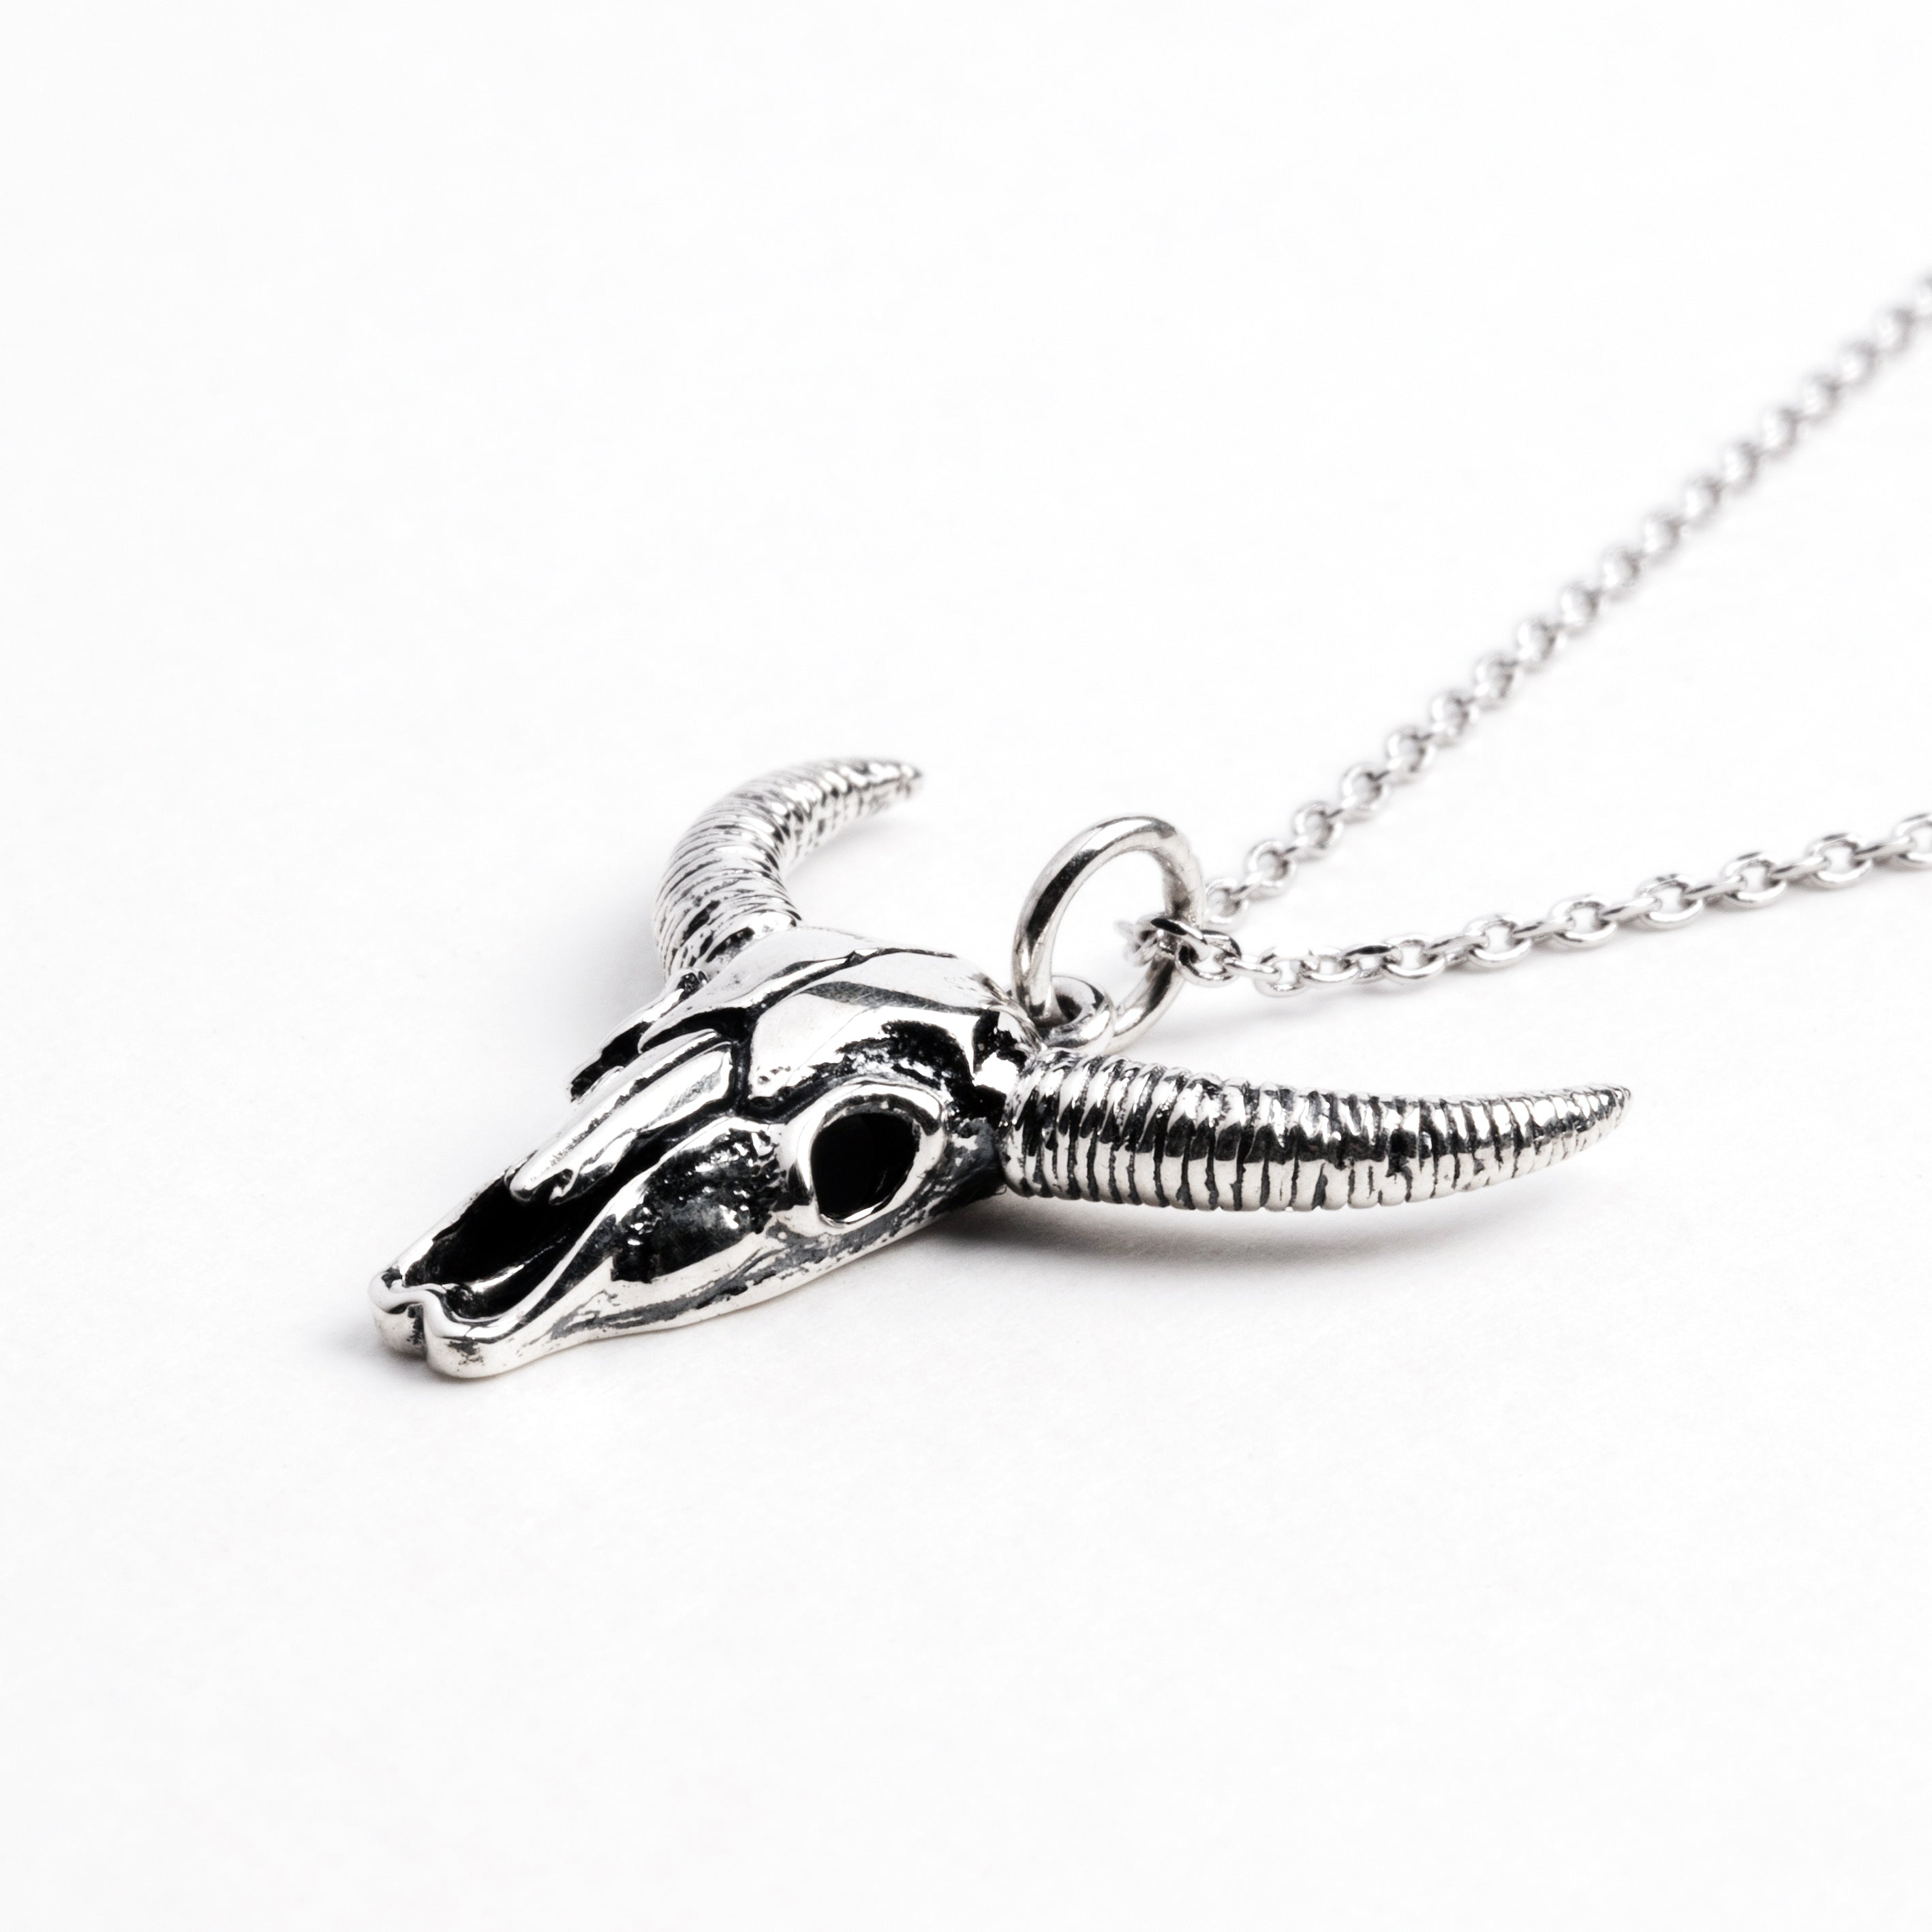 Bull skull silver charm necklace right side view